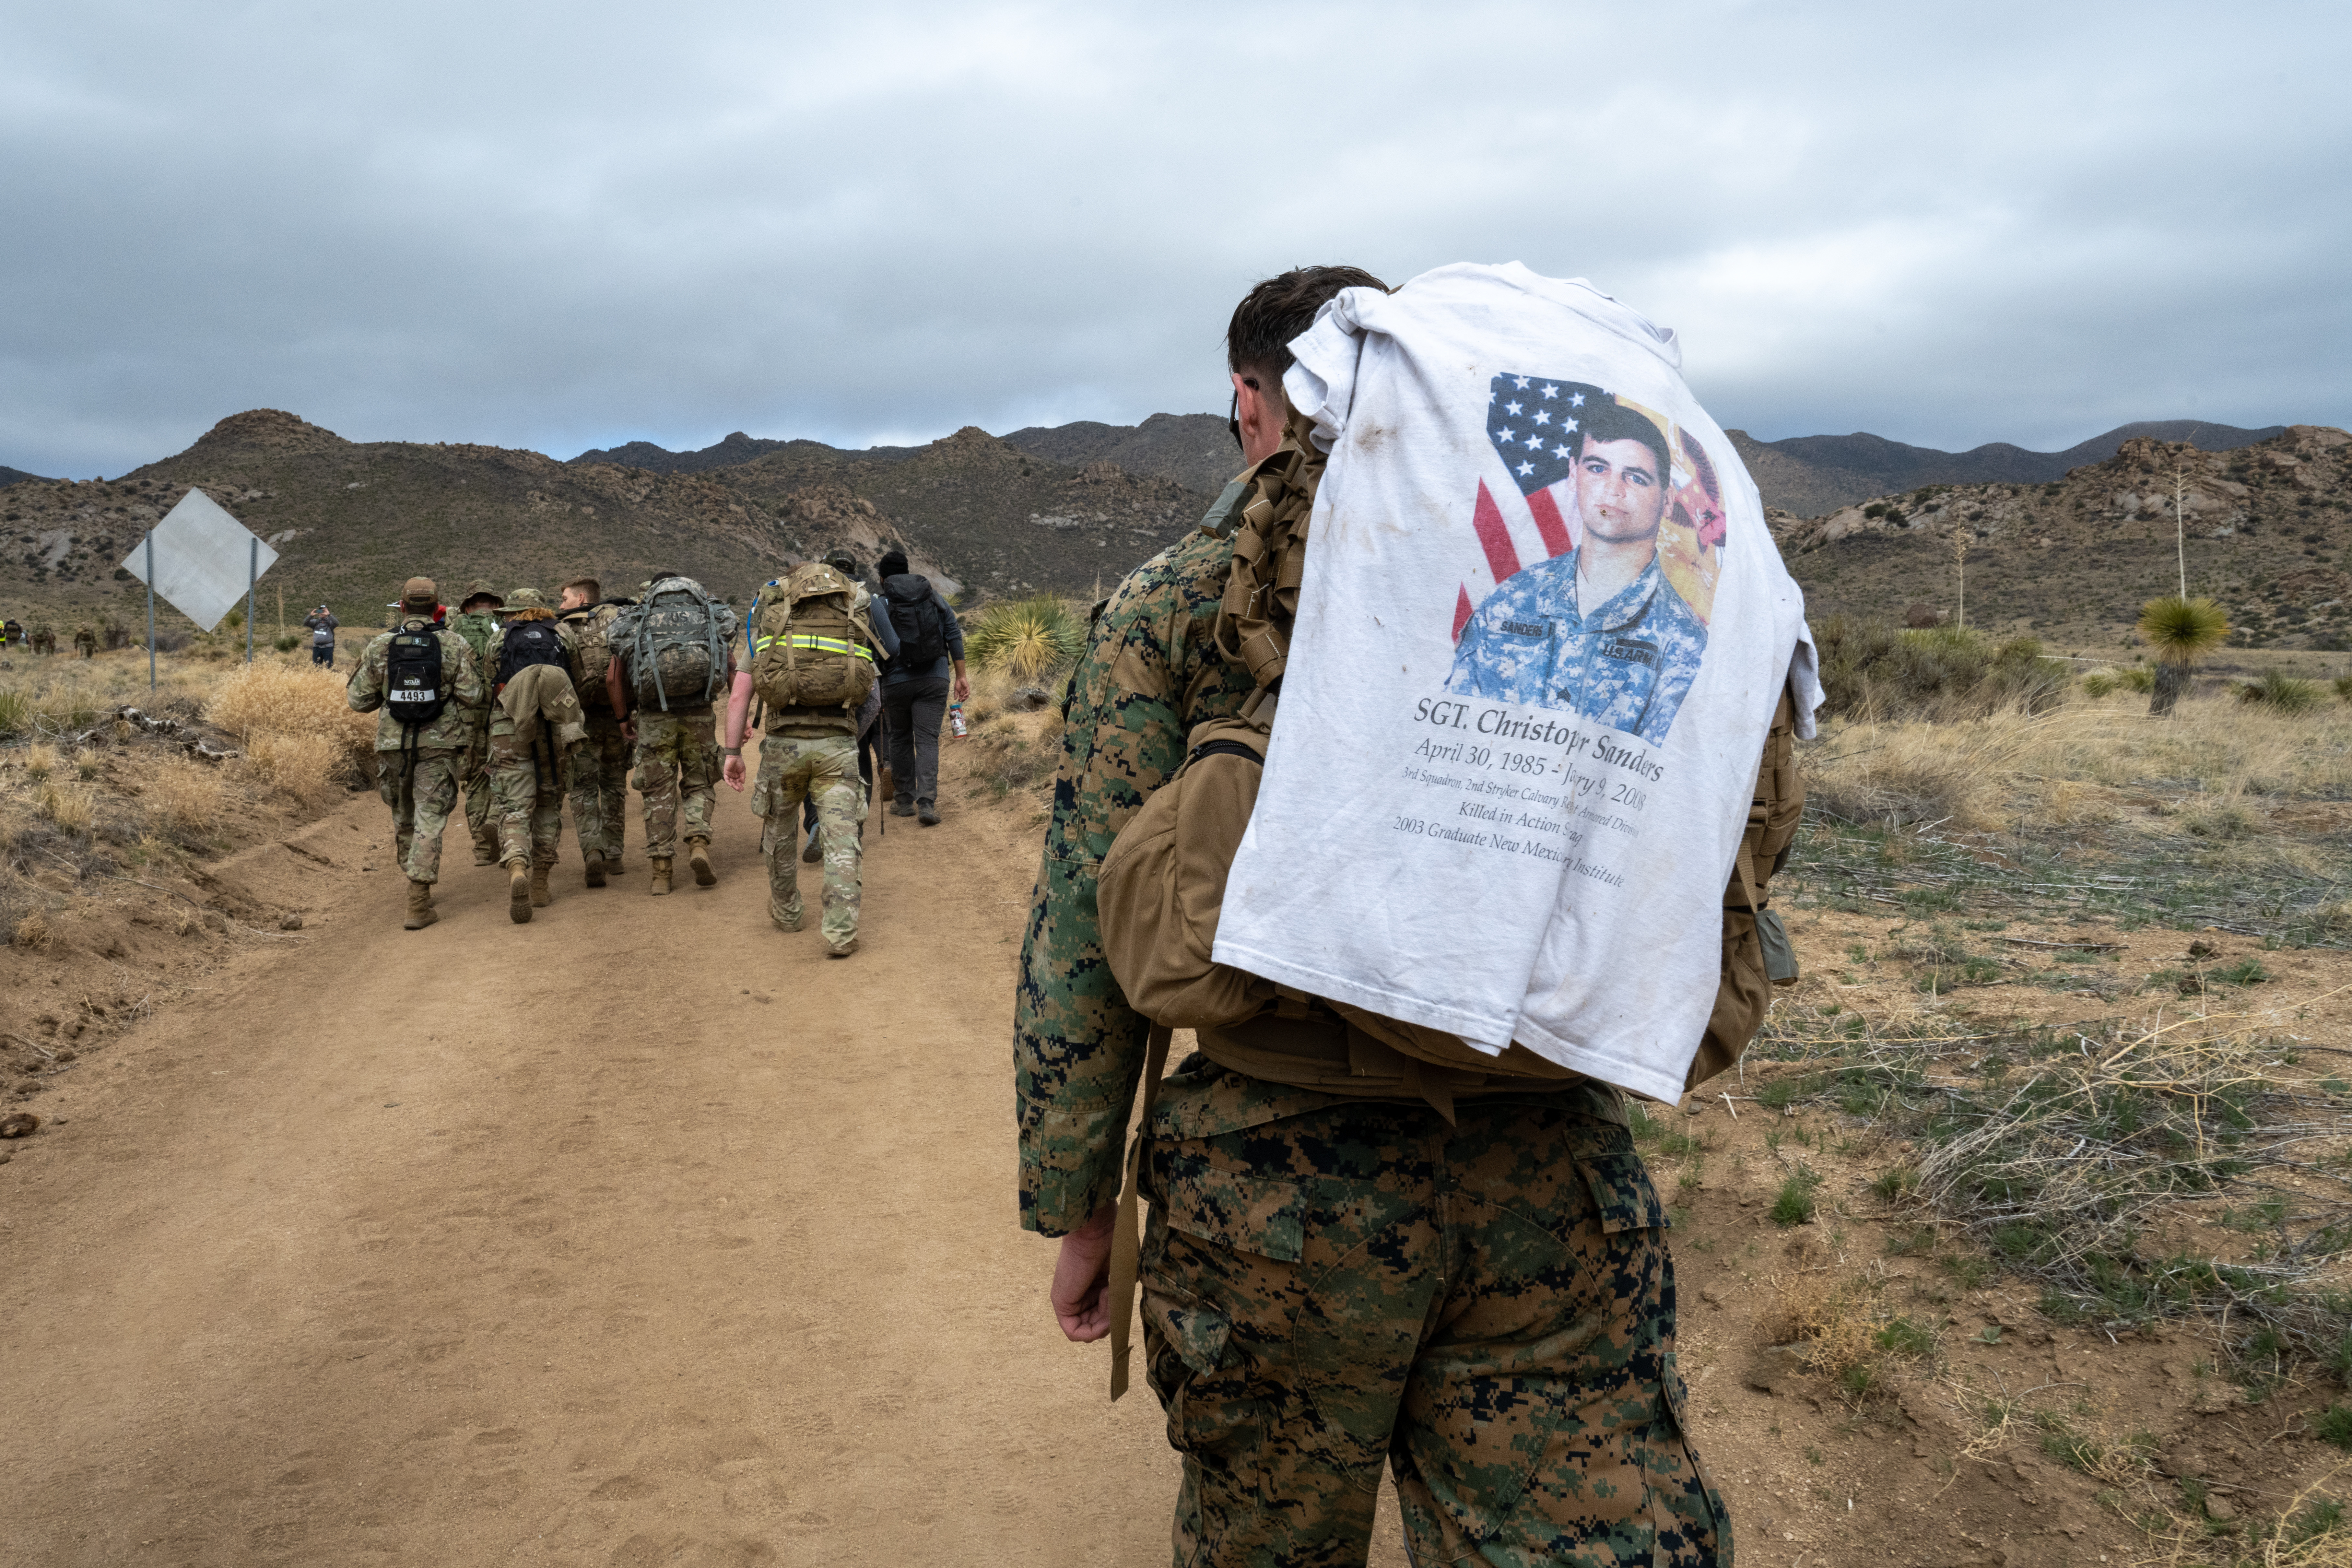 A service member in uniform walks along a dirt path in the desert with a T-shirt draped over a rucksack on his back, while others walk ahead.